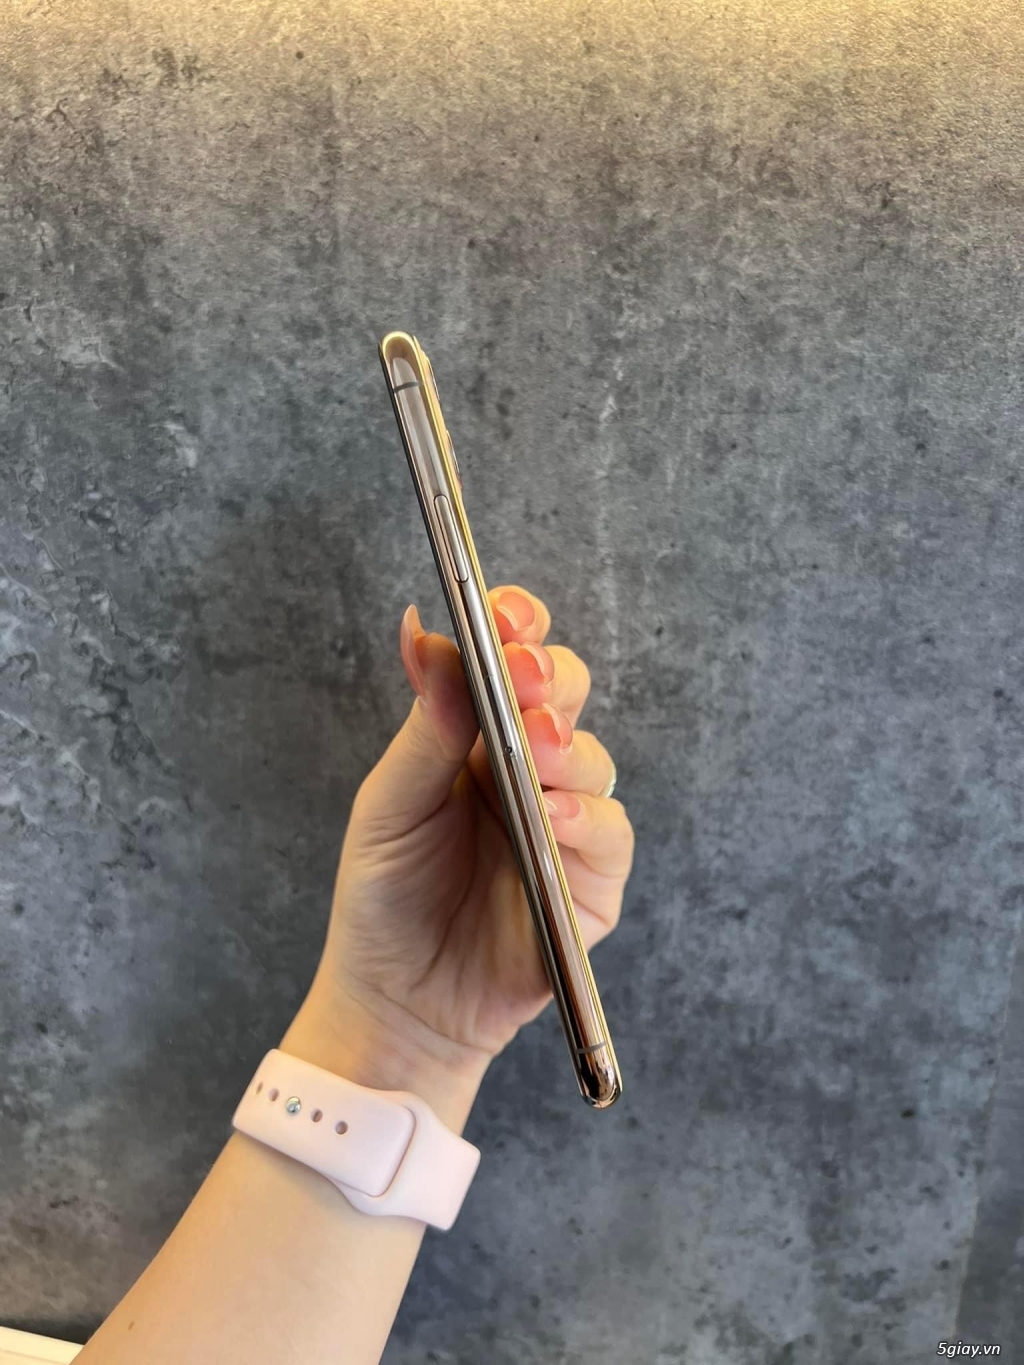 Iphone 11promax 64G Gold giá tốt 5giay.vn - 3